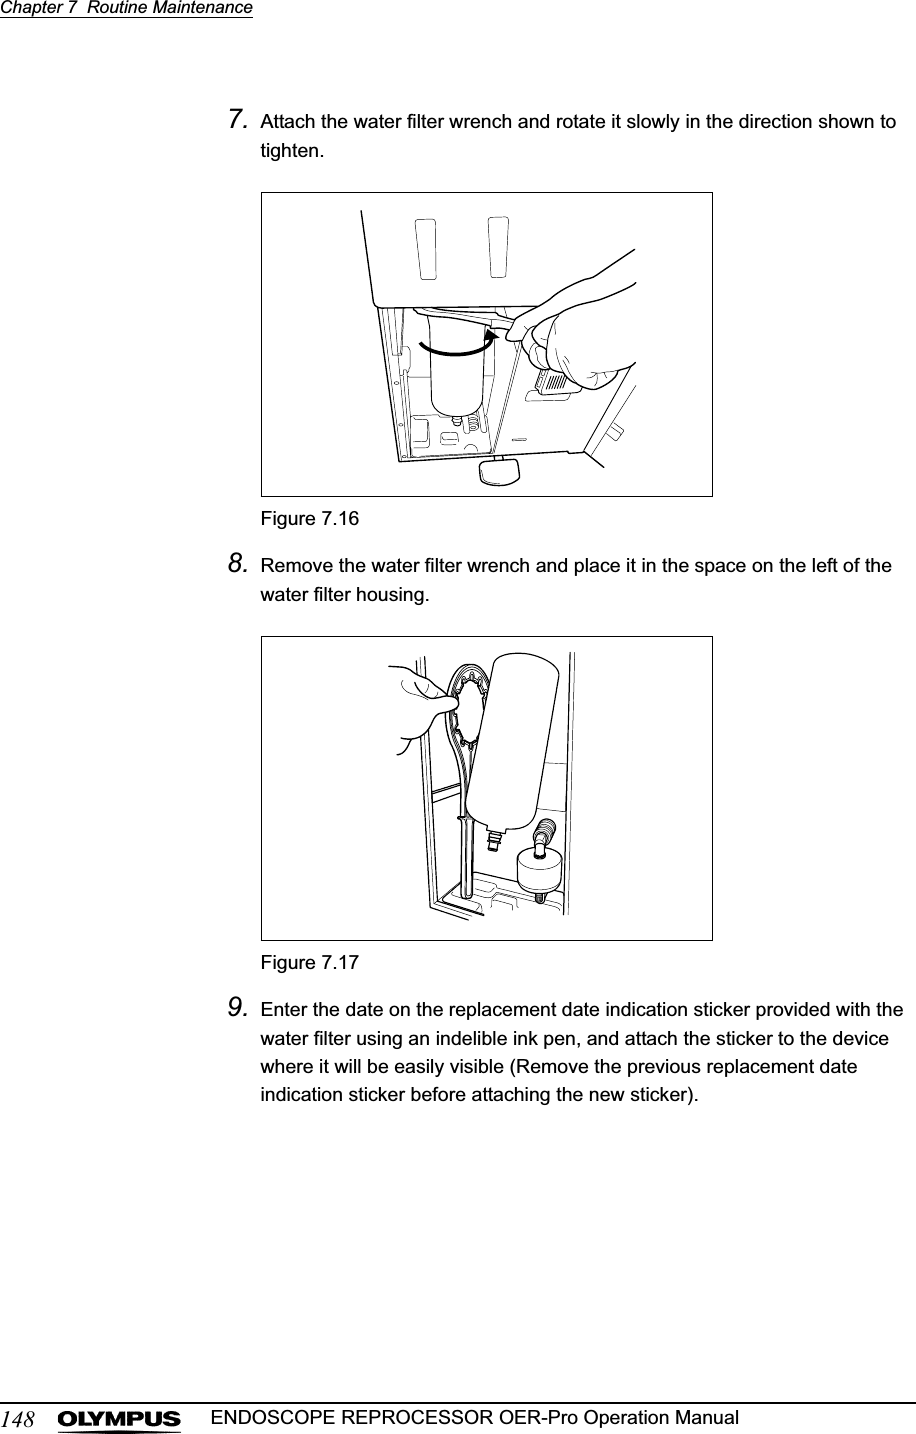 148Chapter 7  Routine MaintenanceENDOSCOPE REPROCESSOR OER-Pro Operation Manual7. Attach the water filter wrench and rotate it slowly in the direction shown to tighten.Figure 7.168. Remove the water filter wrench and place it in the space on the left of the water filter housing.Figure 7.179. Enter the date on the replacement date indication sticker provided with the water filter using an indelible ink pen, and attach the sticker to the device where it will be easily visible (Remove the previous replacement date indication sticker before attaching the new sticker).